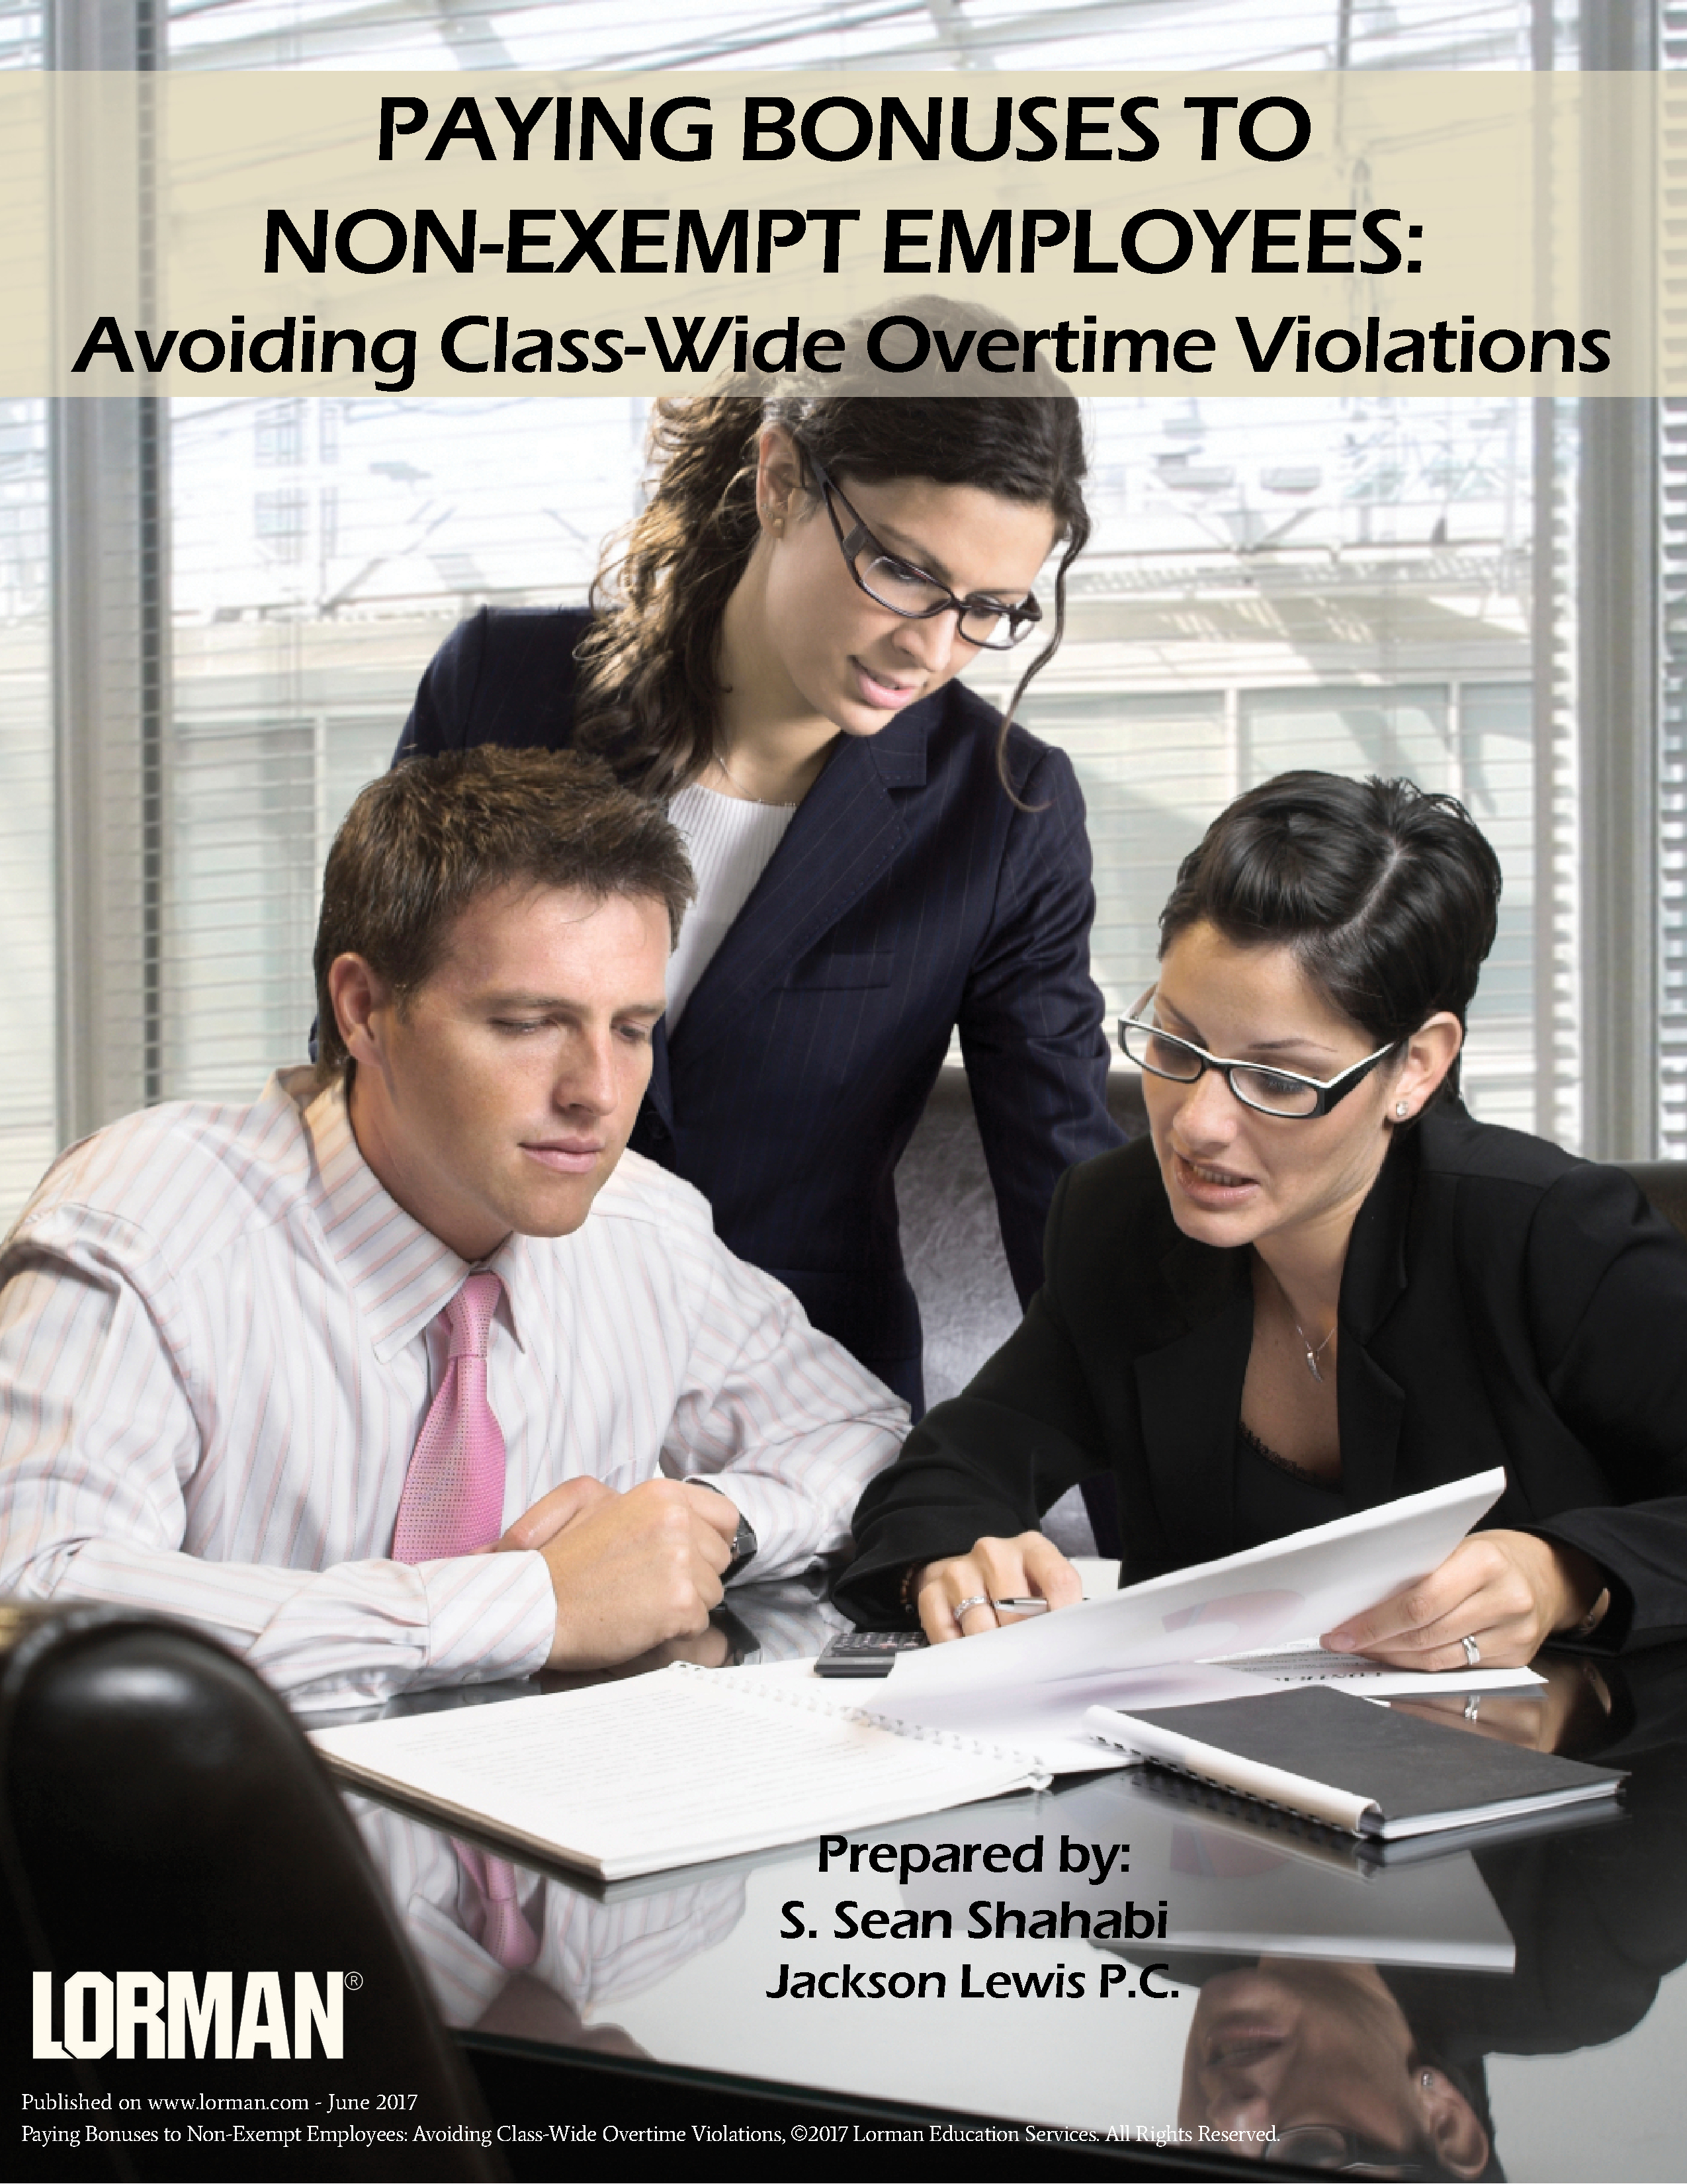 Paying Bonuses to Non-Exempt Employees: Avoiding Class-Wide Overtime Violations